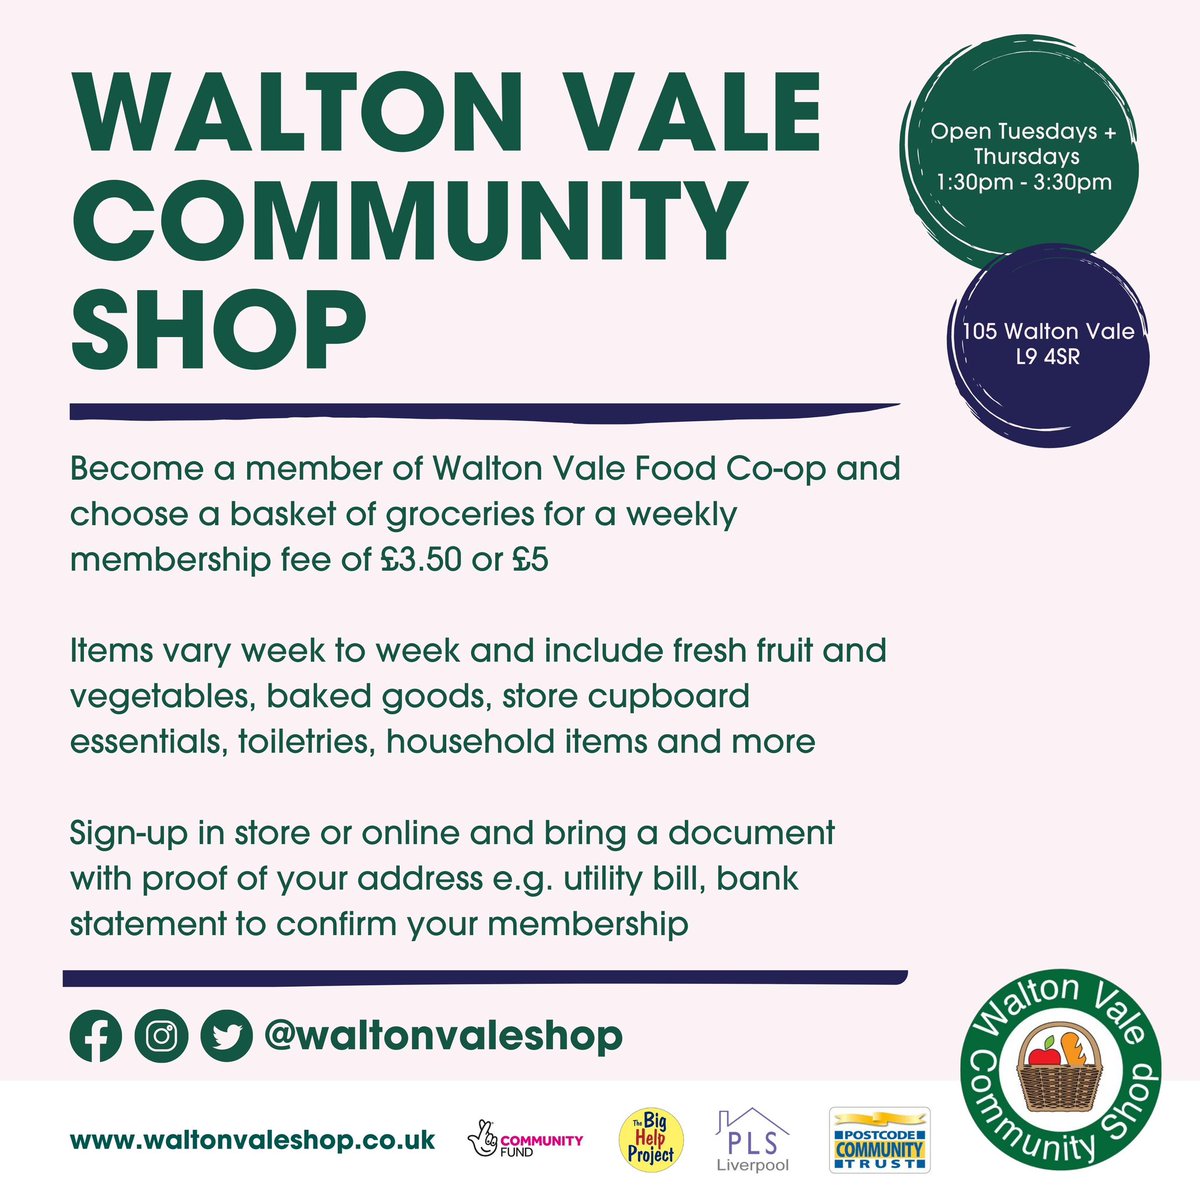 It's our first Thursday opening today! 🤩 How it works: ⏰ We’re open 1:30-3:30pm 🛒 Members pay £3.50 or £5 for a basket of groceries 🍎 Items vary weekly and include fresh fruit & veg, store cupboard essentials, toiletries, household items & more ✅ Open to all in Walton